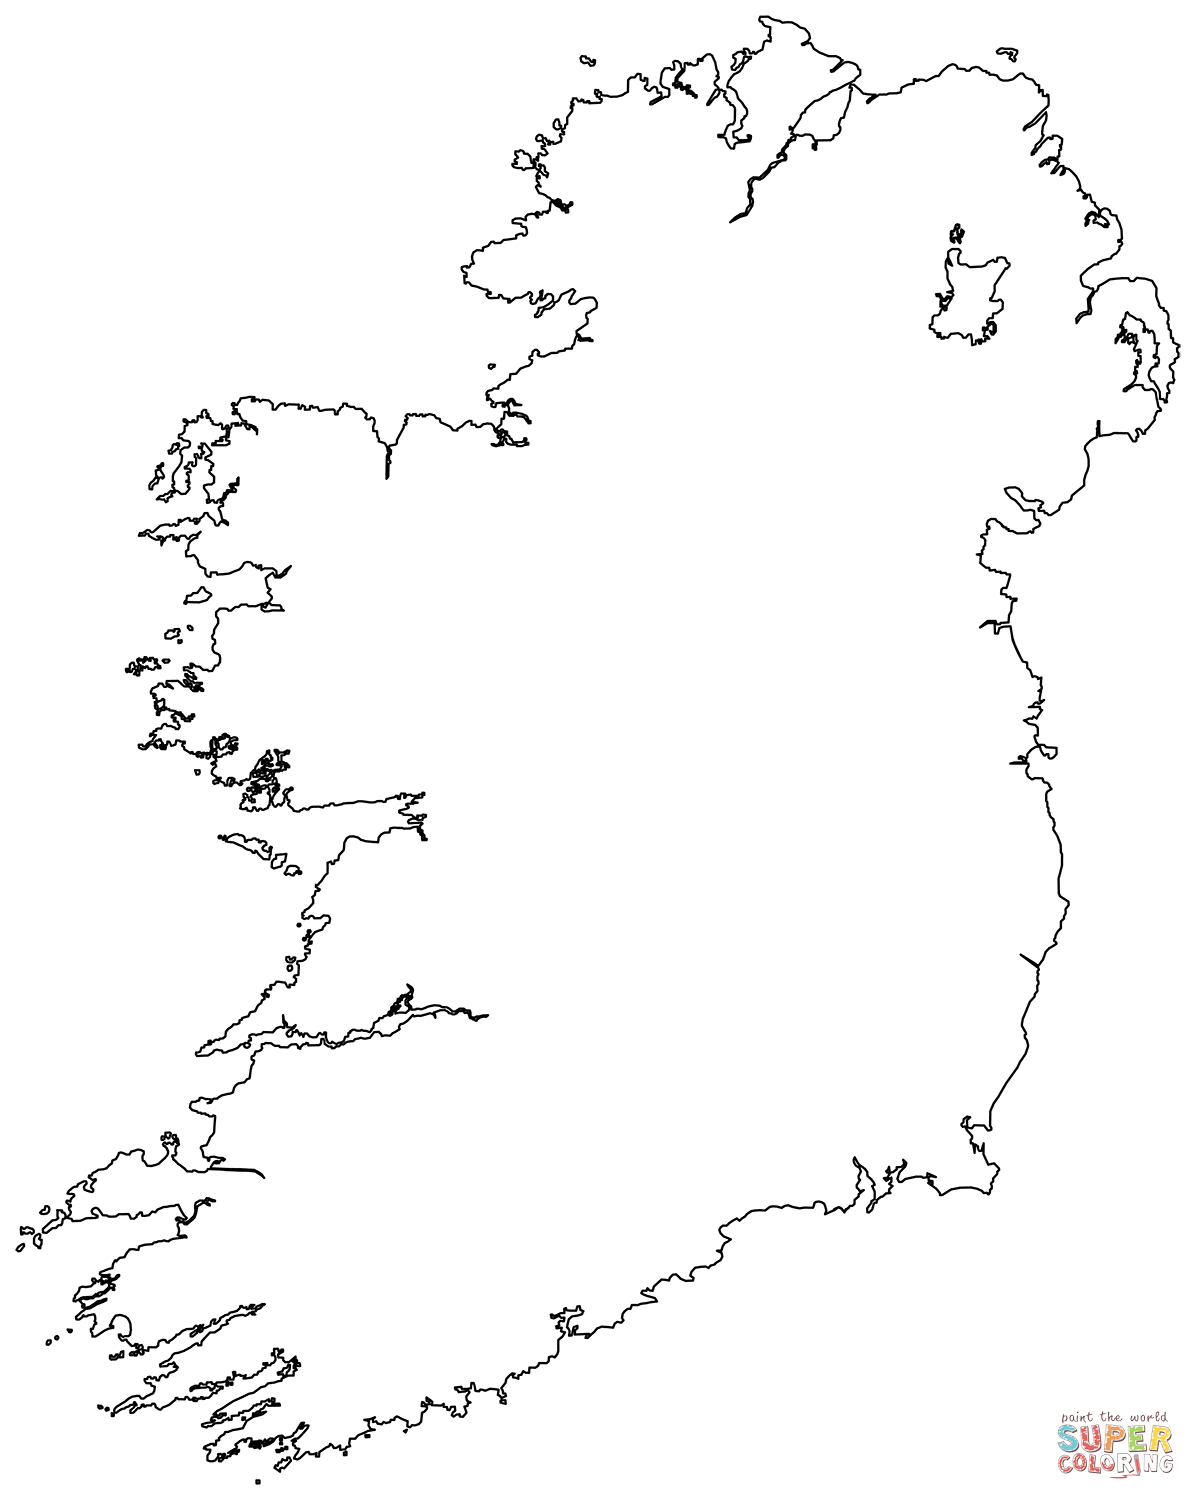 Outline map of ireland coloring page free printable coloring pages